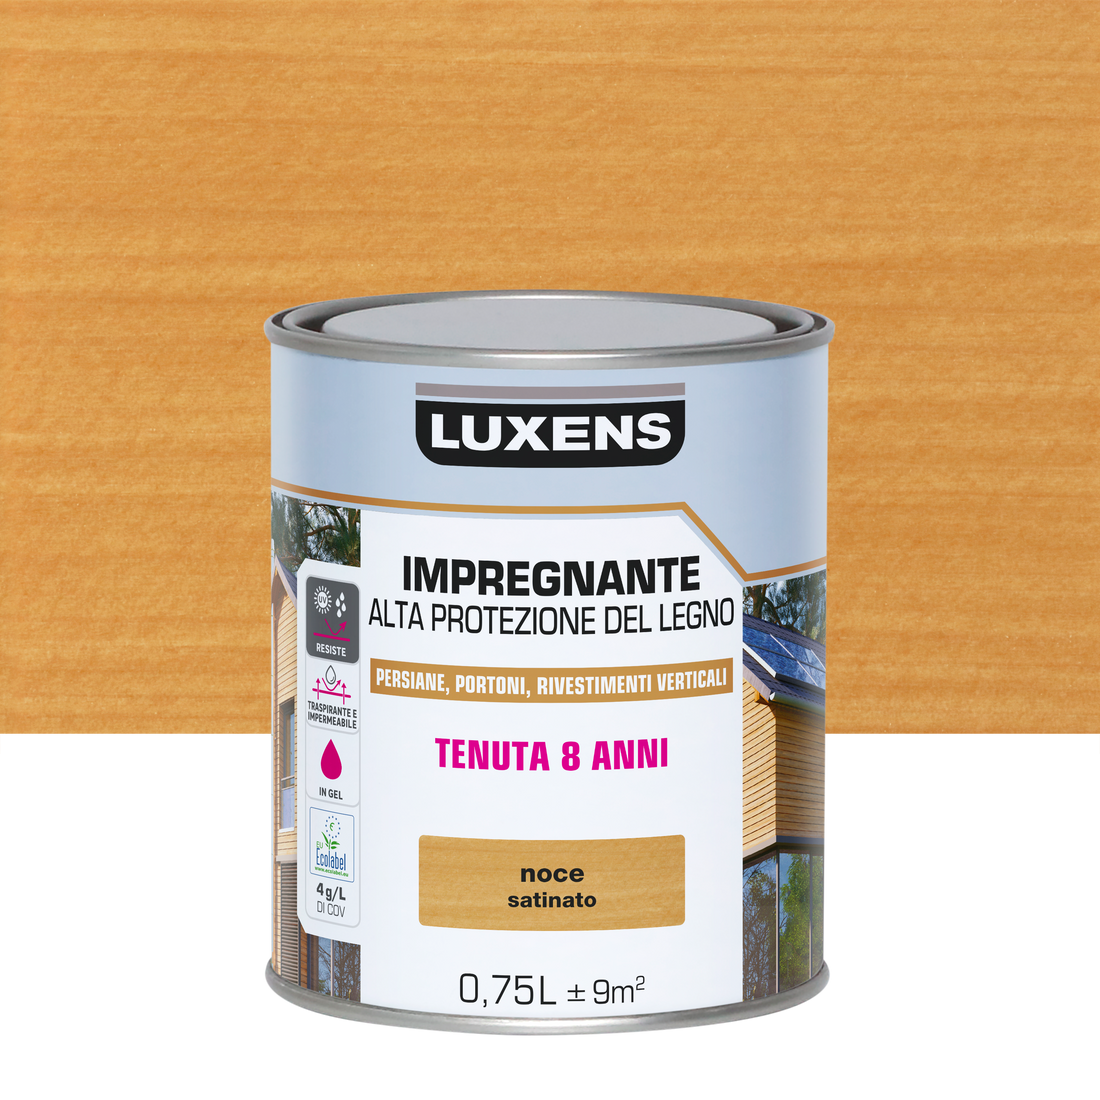 LUXENS HIGH-PROTECTION WALNUT WATER-BASED WOOD PRESERVATIVE 750 ML